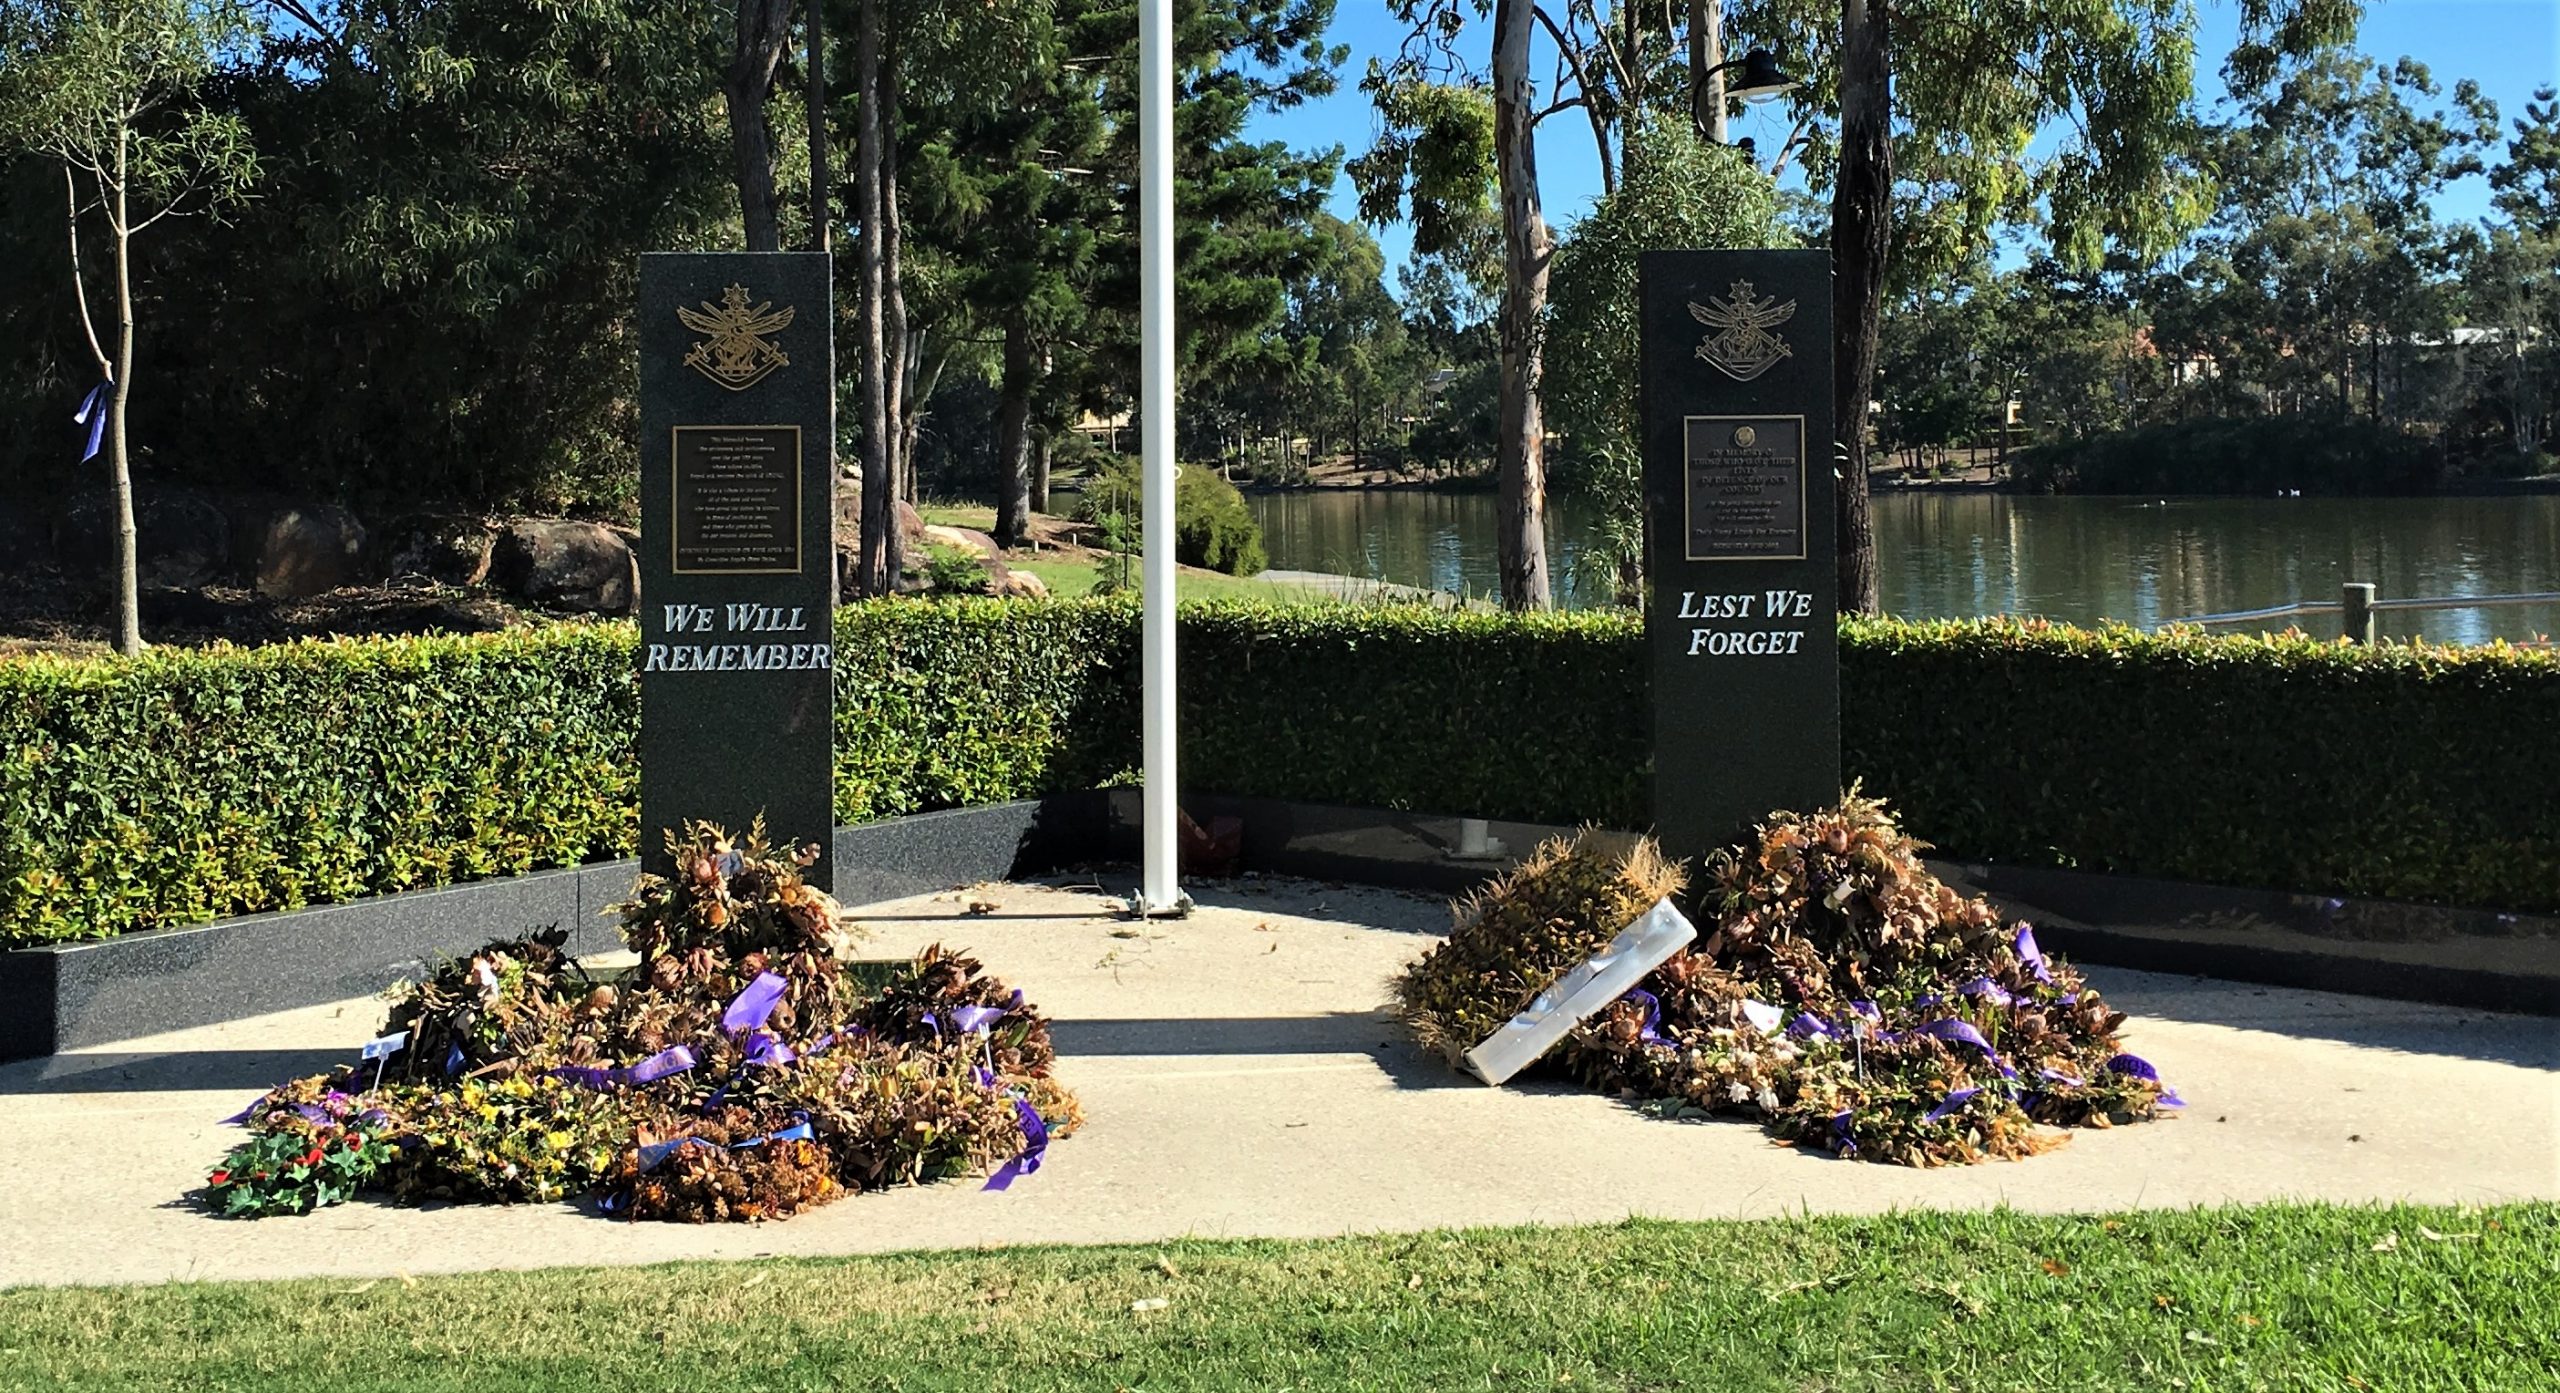 Remaining wreaths left from Anzac Day 25 April at the war memorial beside the lake at Forest Lake.